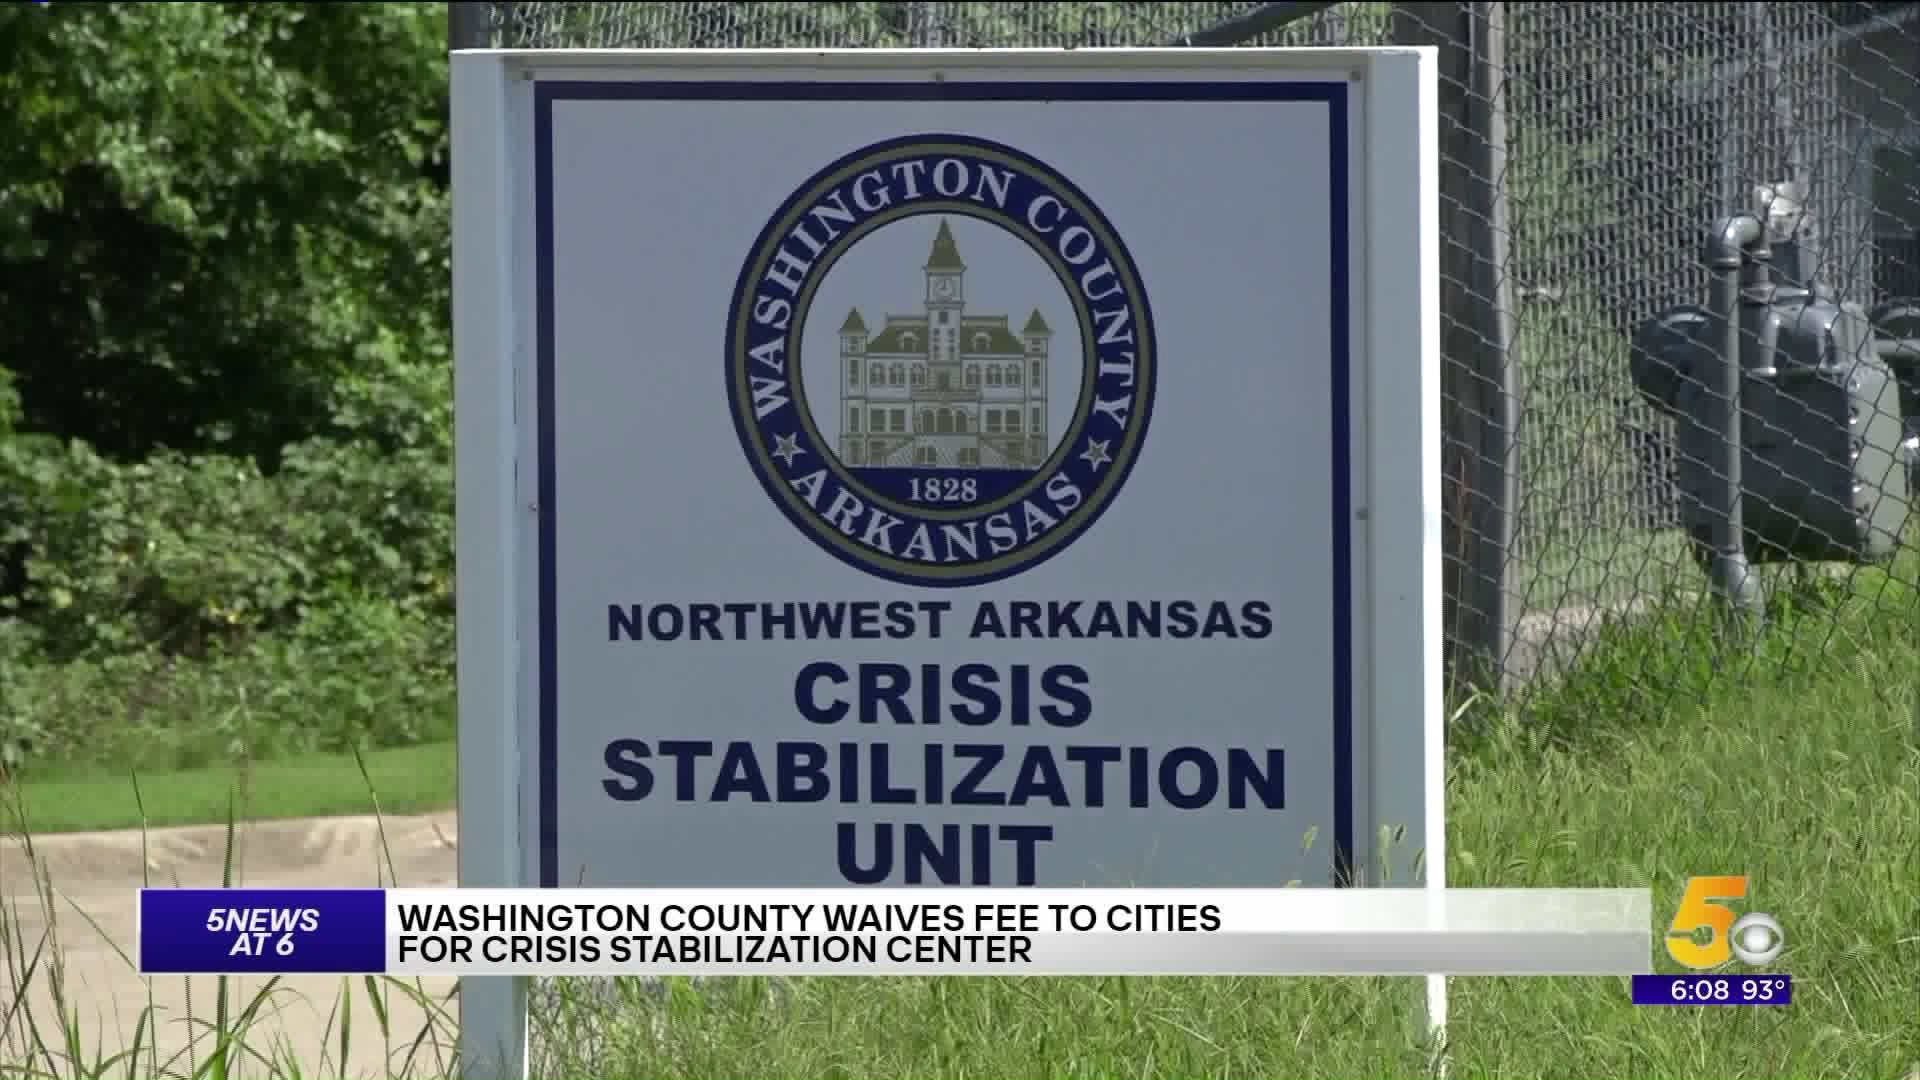 Washington County Waves Fee For The City For Crisis Center